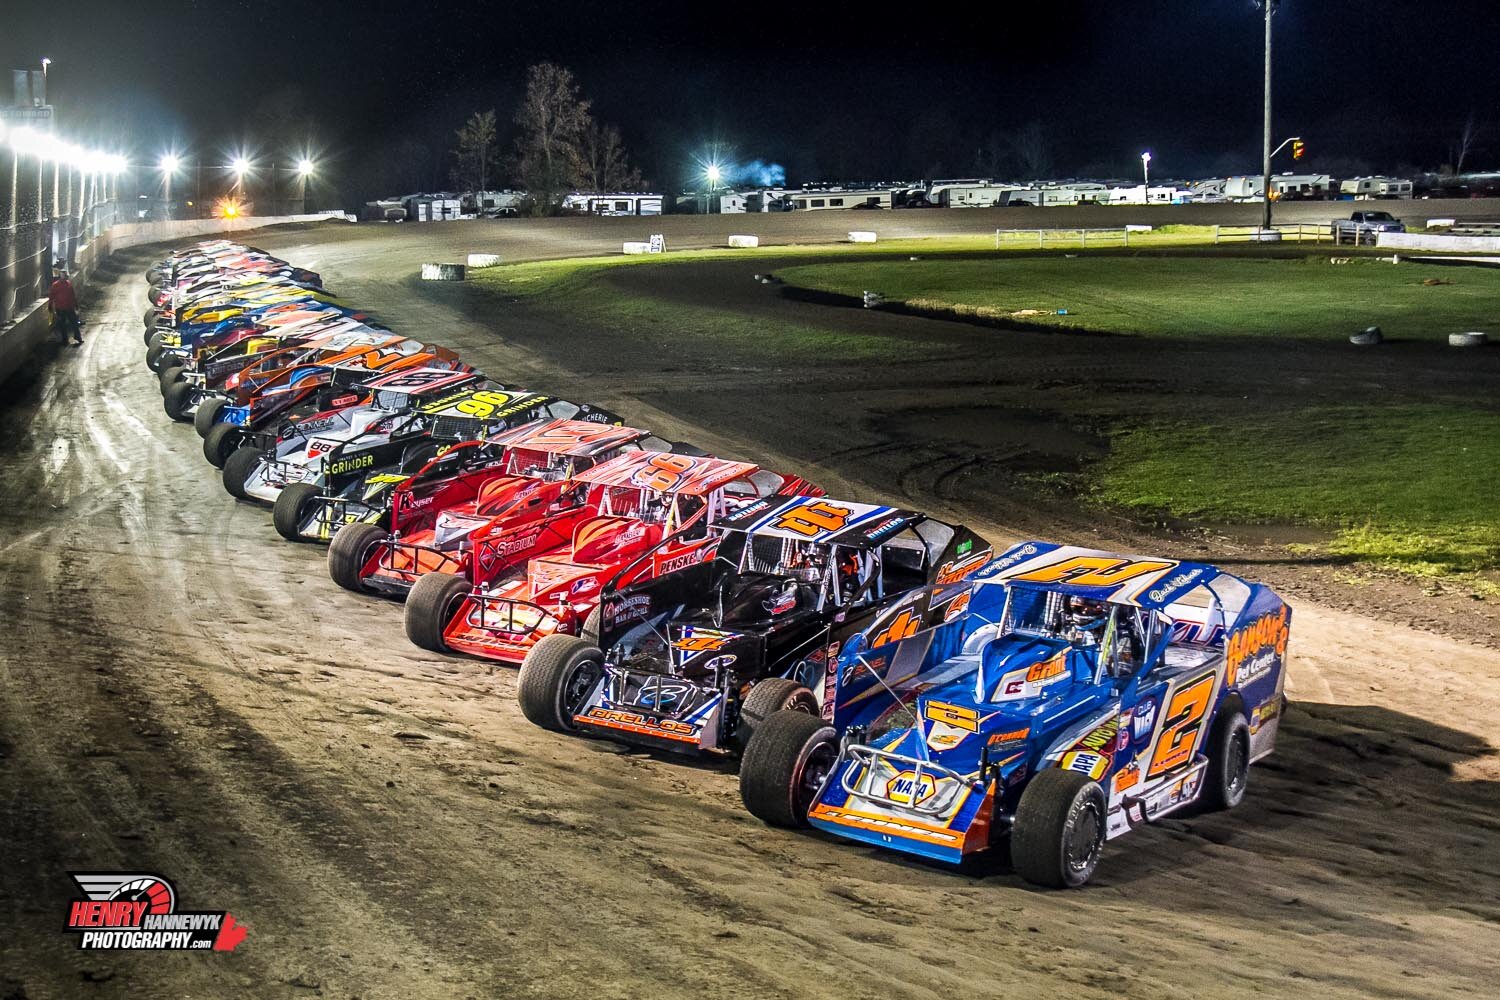  The 11th annual Loud ‘n’ Dirty BOS Fall Nationals Big Blocks  Oct 18, 2019 